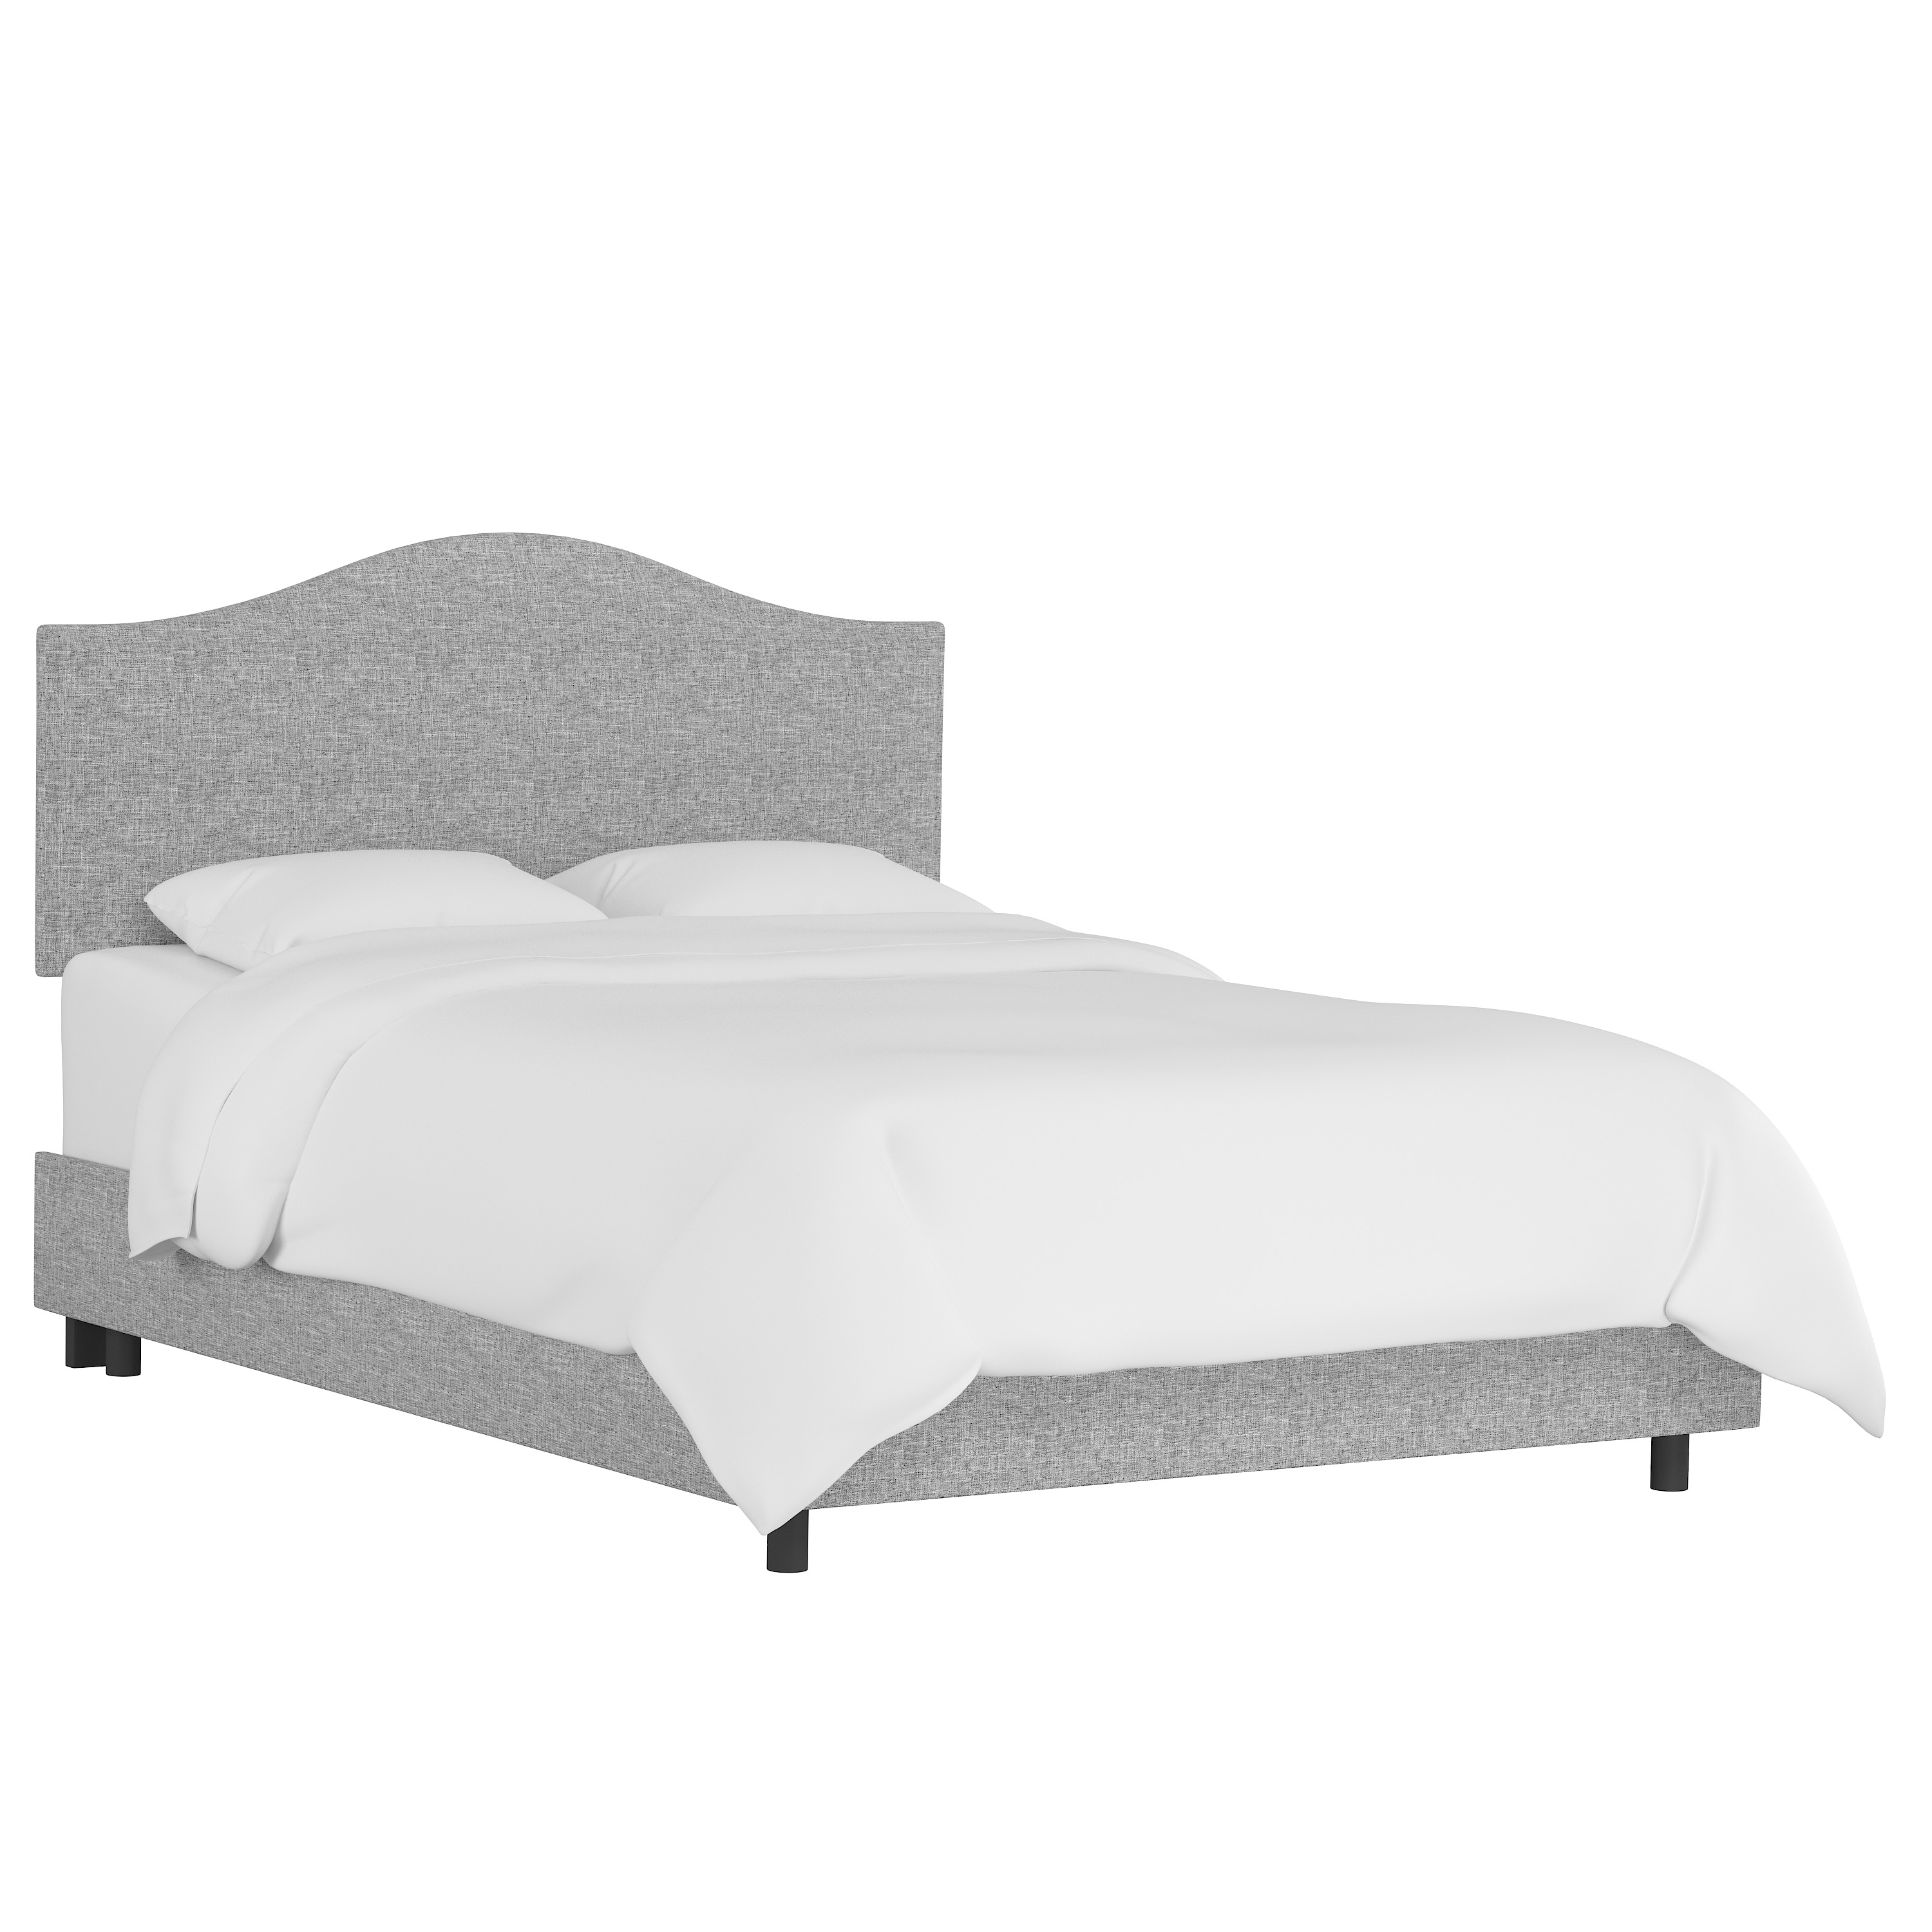 King Kenmore Bed in Zuma Pumice - Image 0